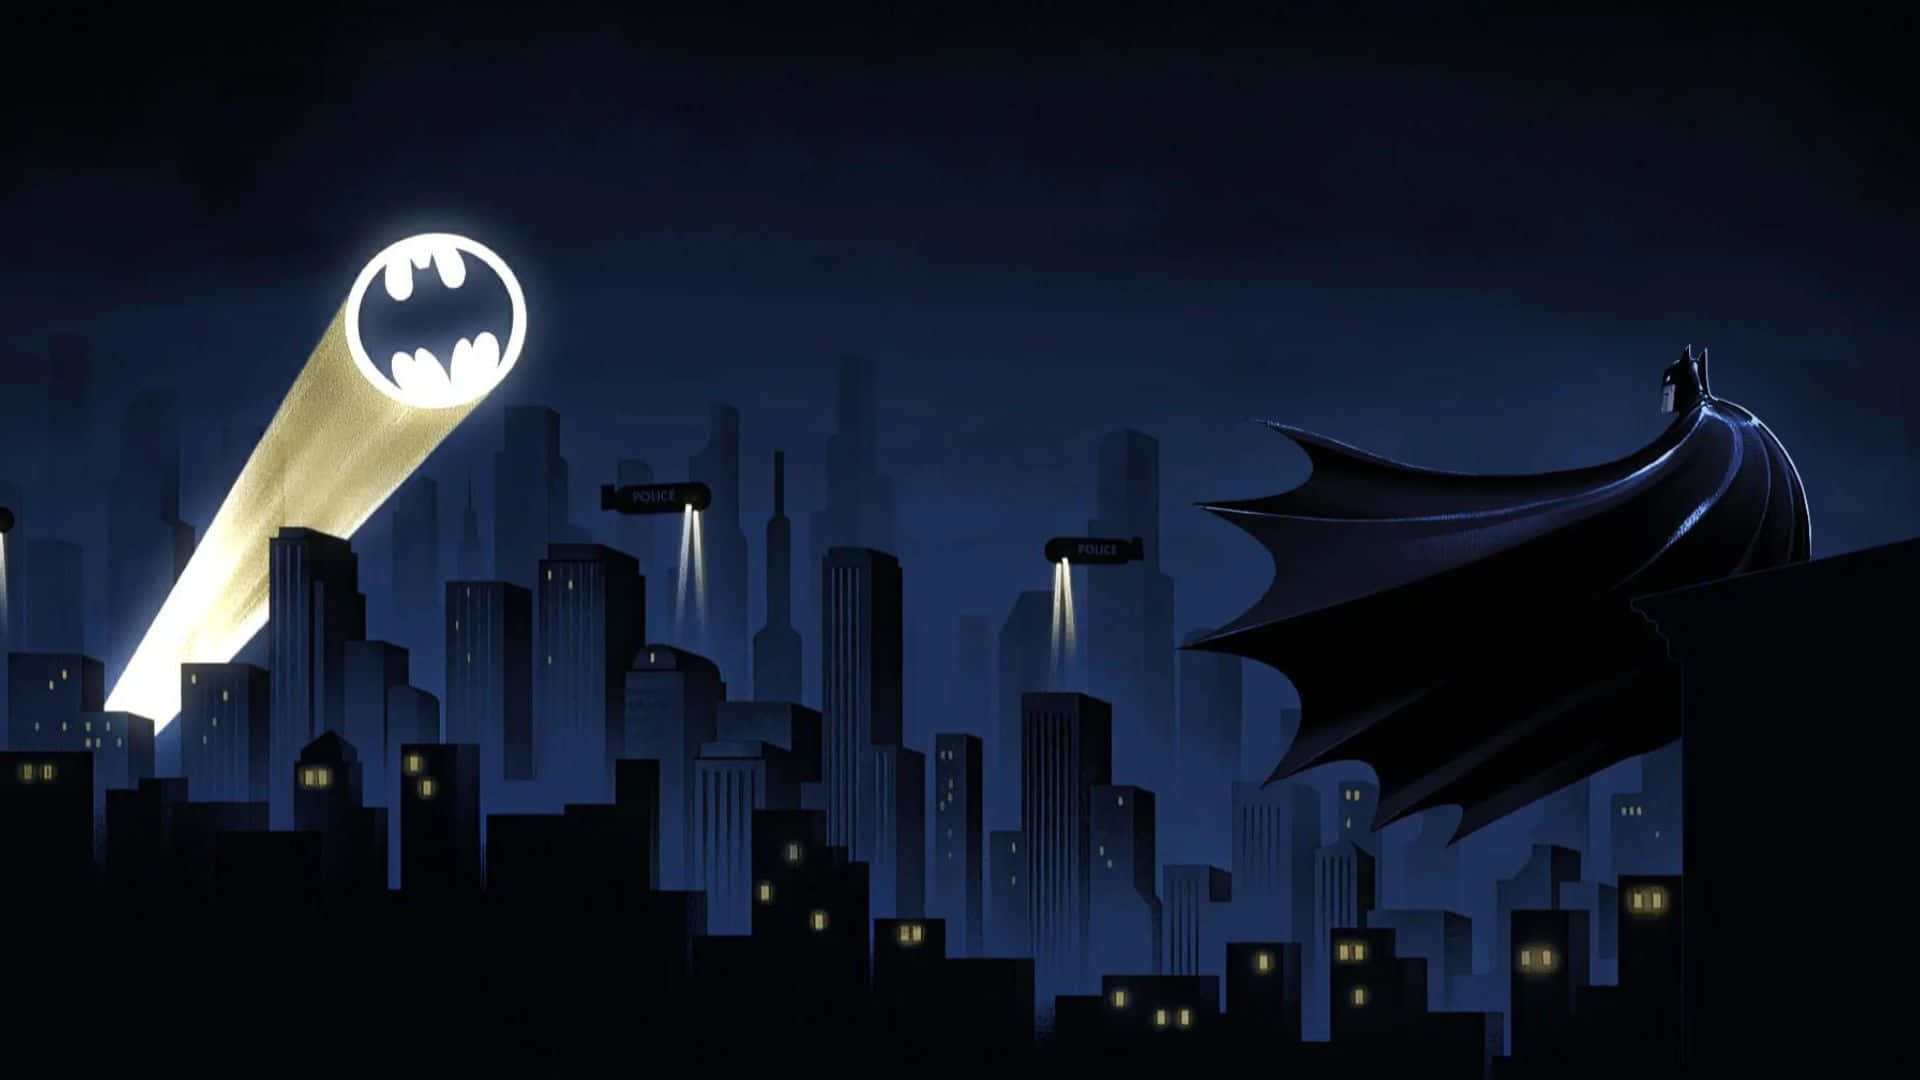 The Glowing Bat Signal in the Night Sky Wallpaper